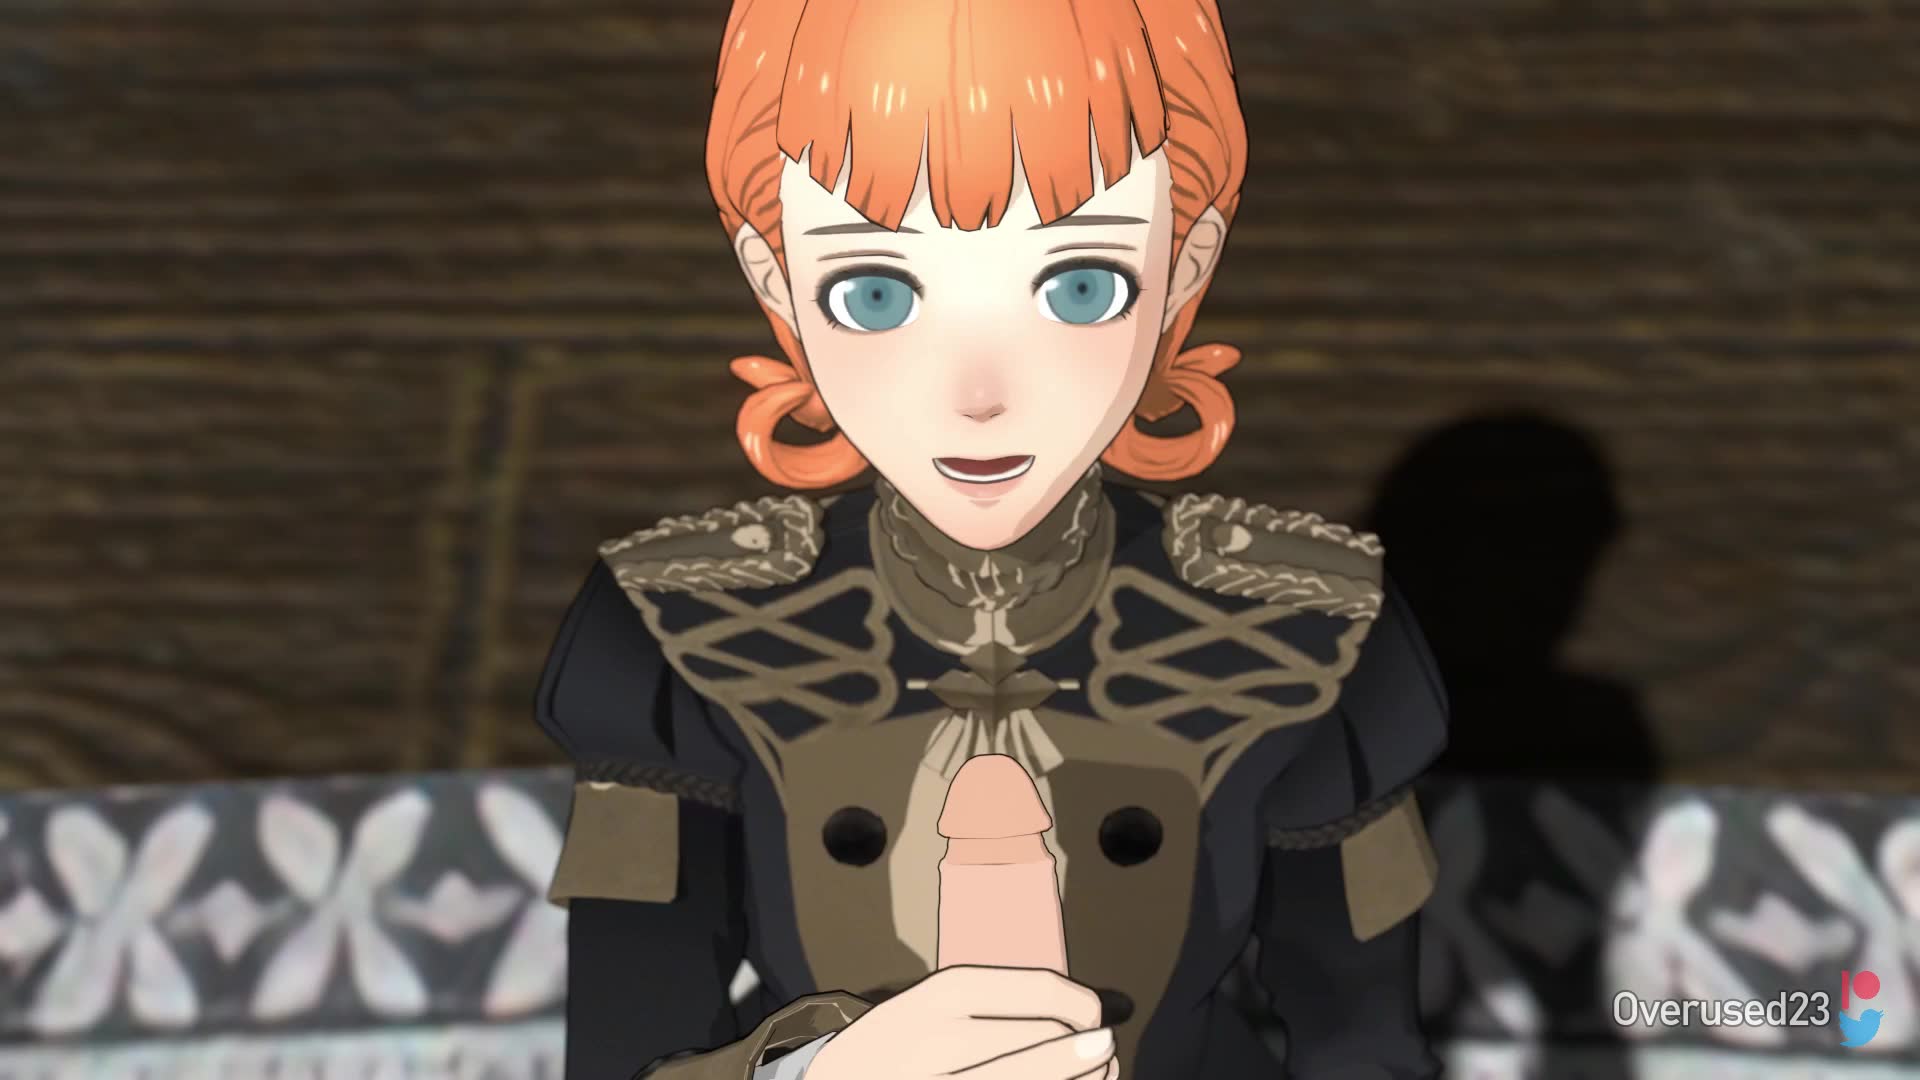 Annette Fantine Dominic gives handjob and blowjob to Byleth – Fire Emblem NSFW animation thumbnail